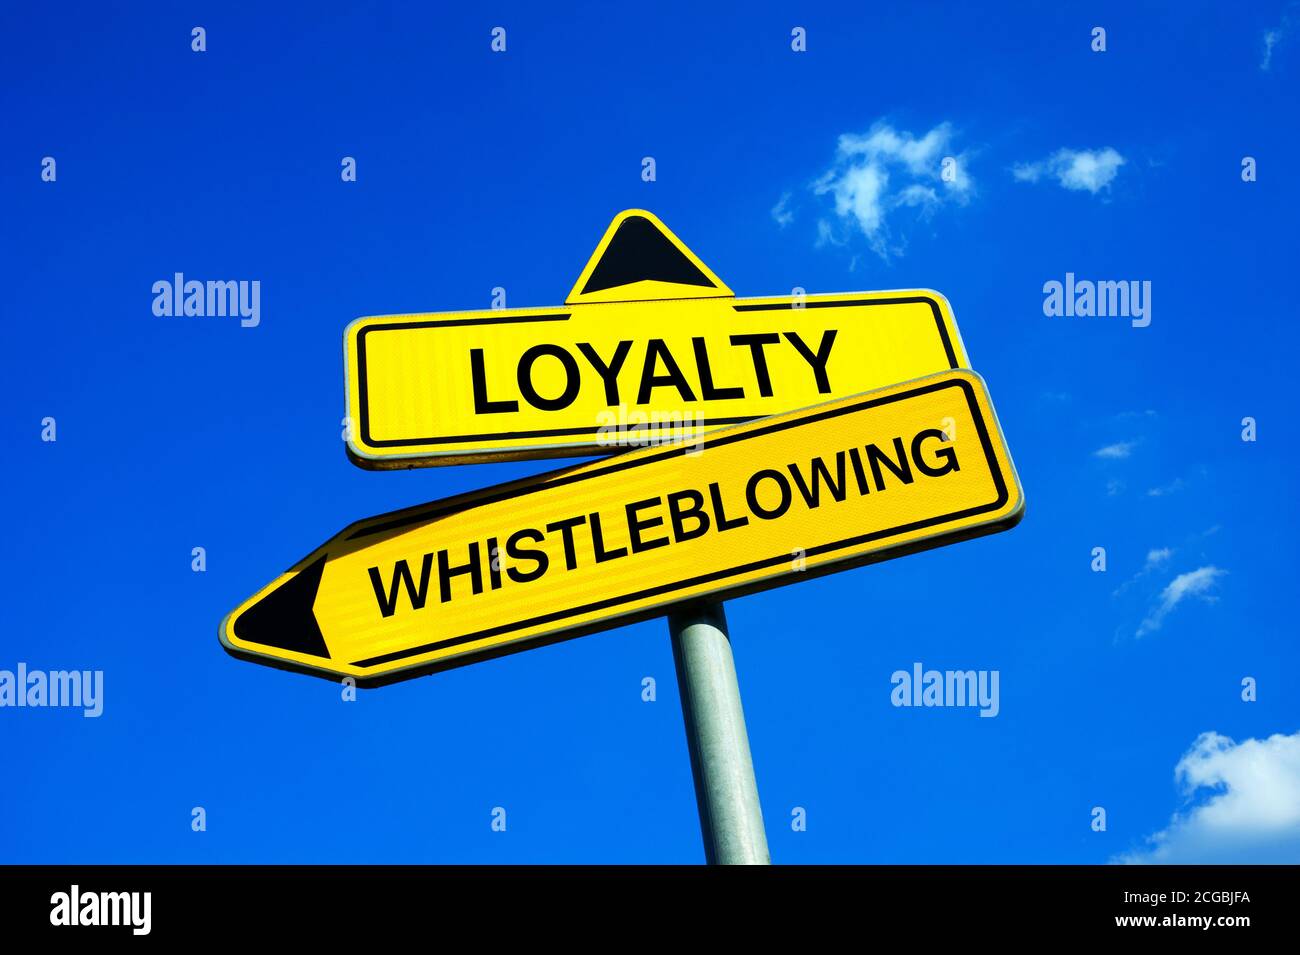 Loyalty or Whistleblowing - Traffic sign with two options - Appeal to expose illegal, unethical and not correct activities because of public good Stock Photo